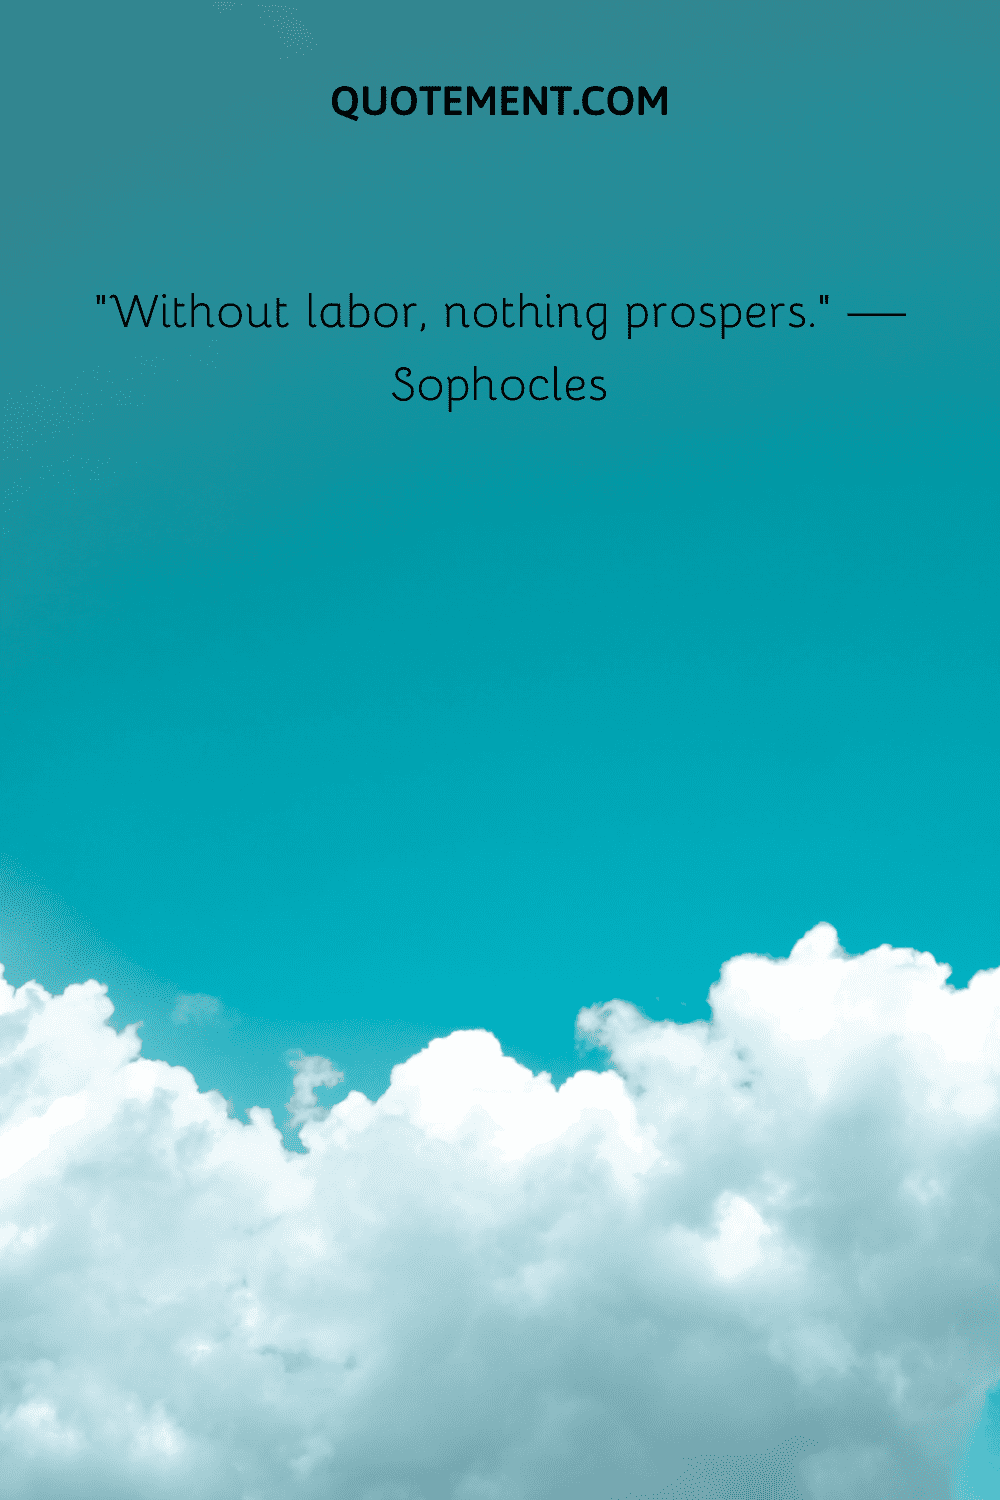 Without labor, nothing prospers